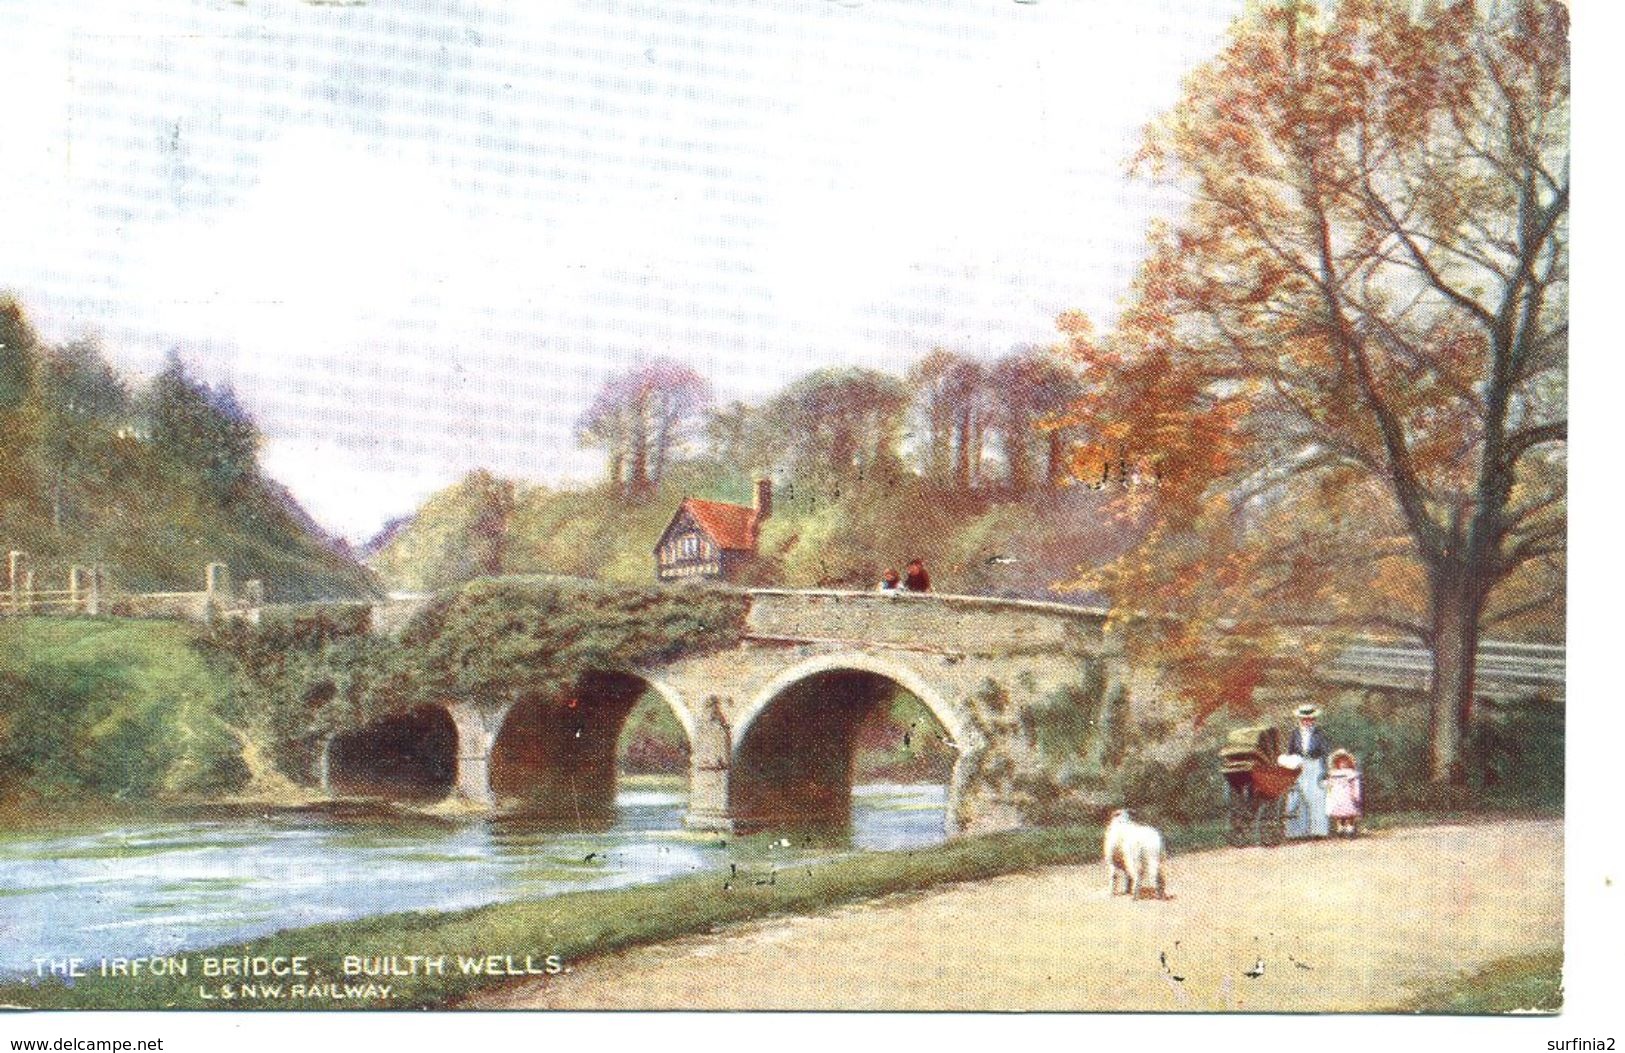 BUILTH WELLS - THE IRFON BRIDGE - LNWR OFFICIAL - Breconshire